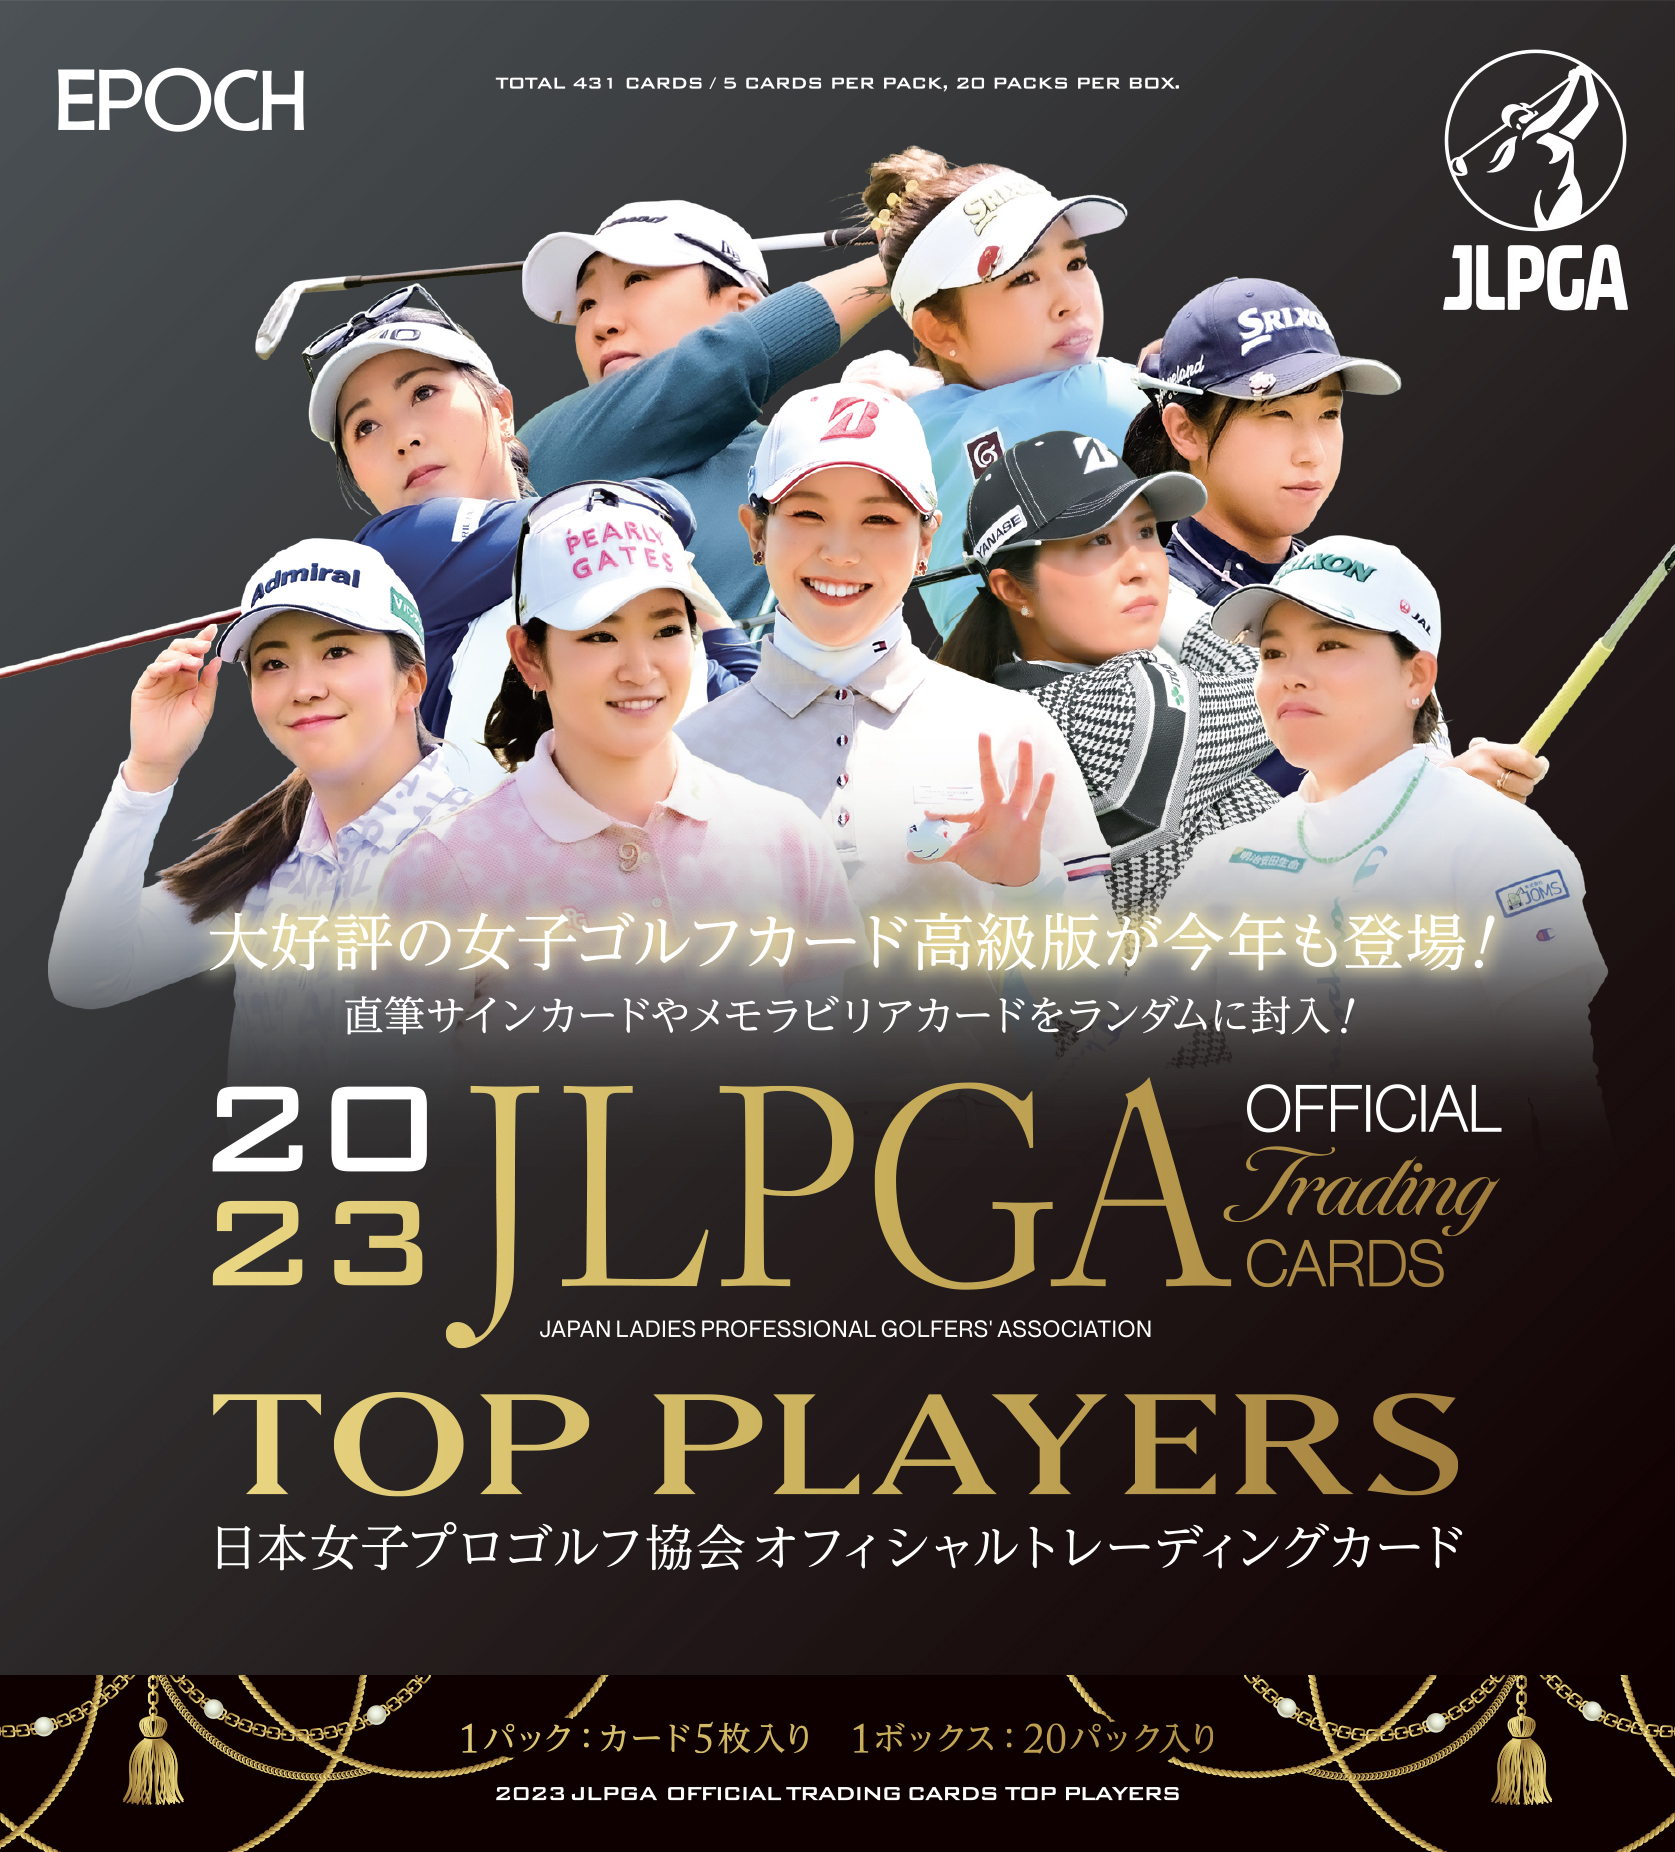 ⛳ EPOCH 2023 JLPGA OFFICIAL TRADING CARDS TOP PLAYERS【製品情報